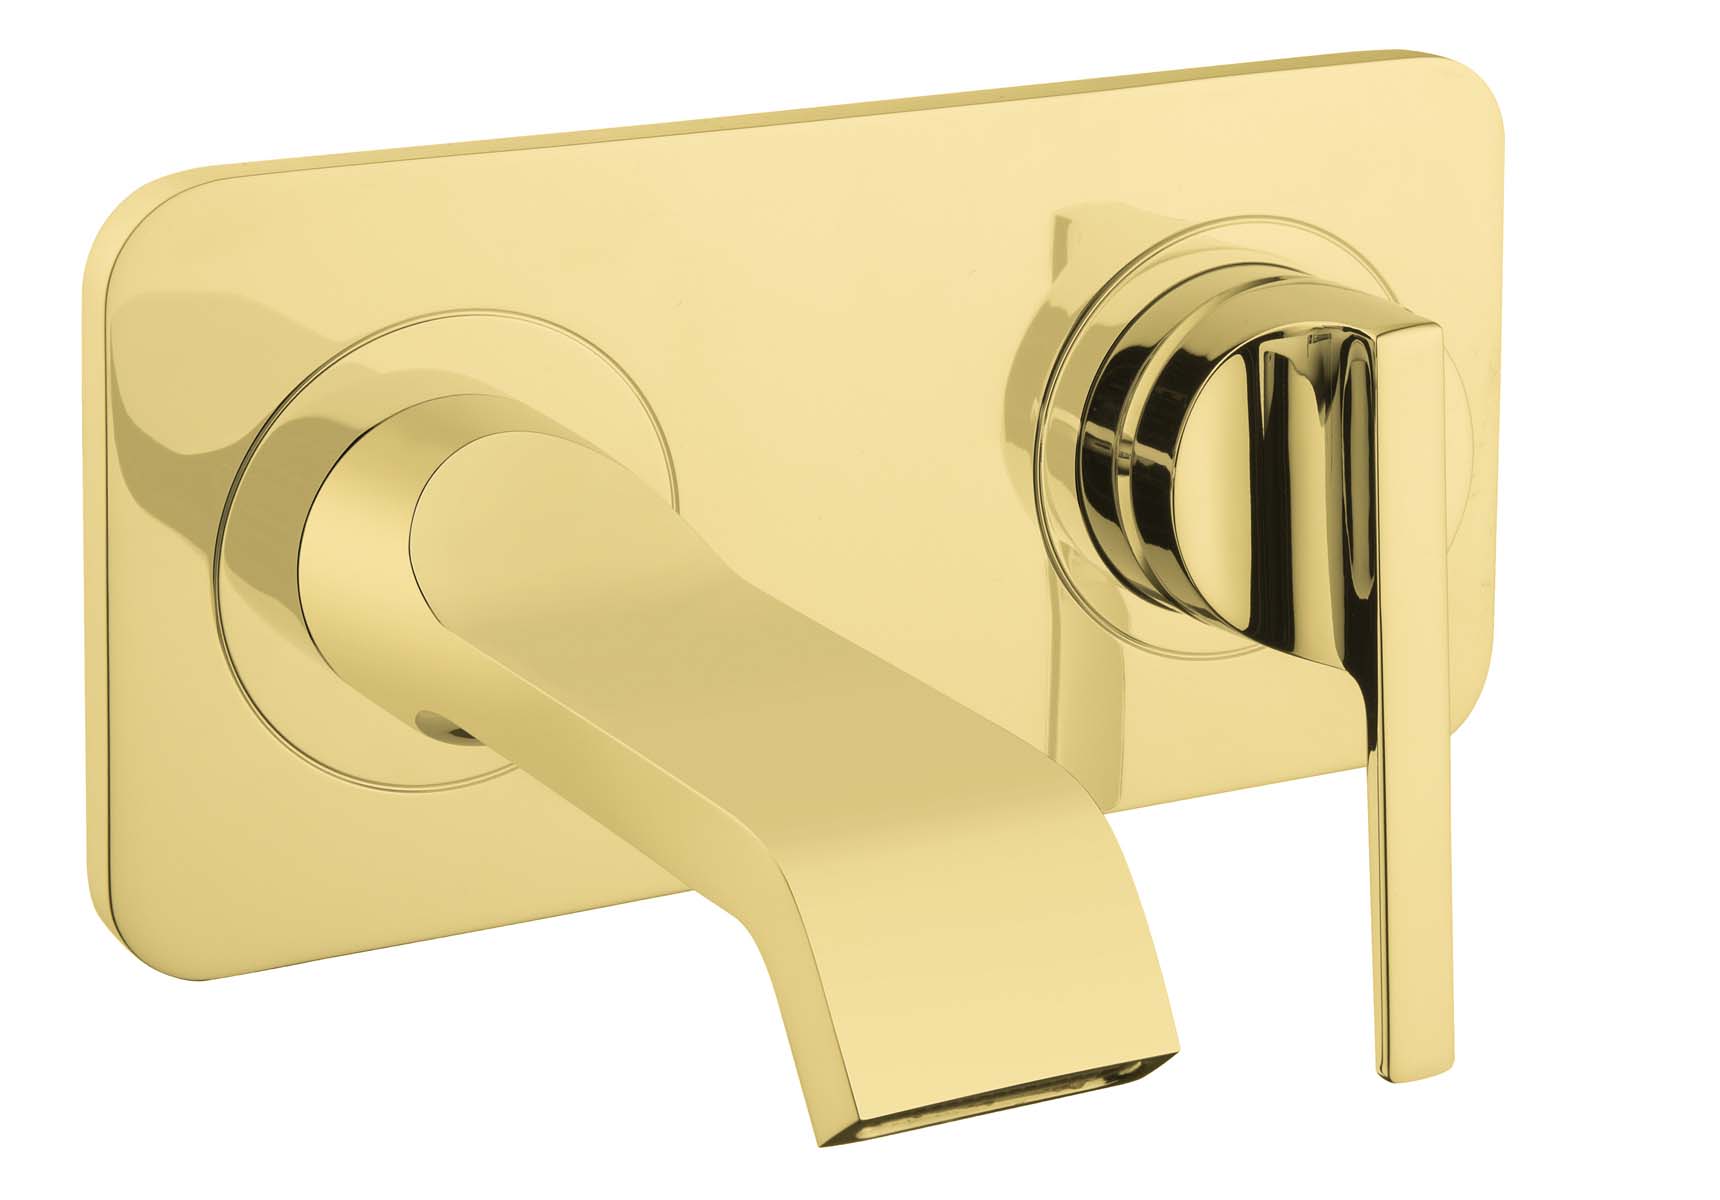 Suit Built-In Basin Mixer, Exposed Part, Gold